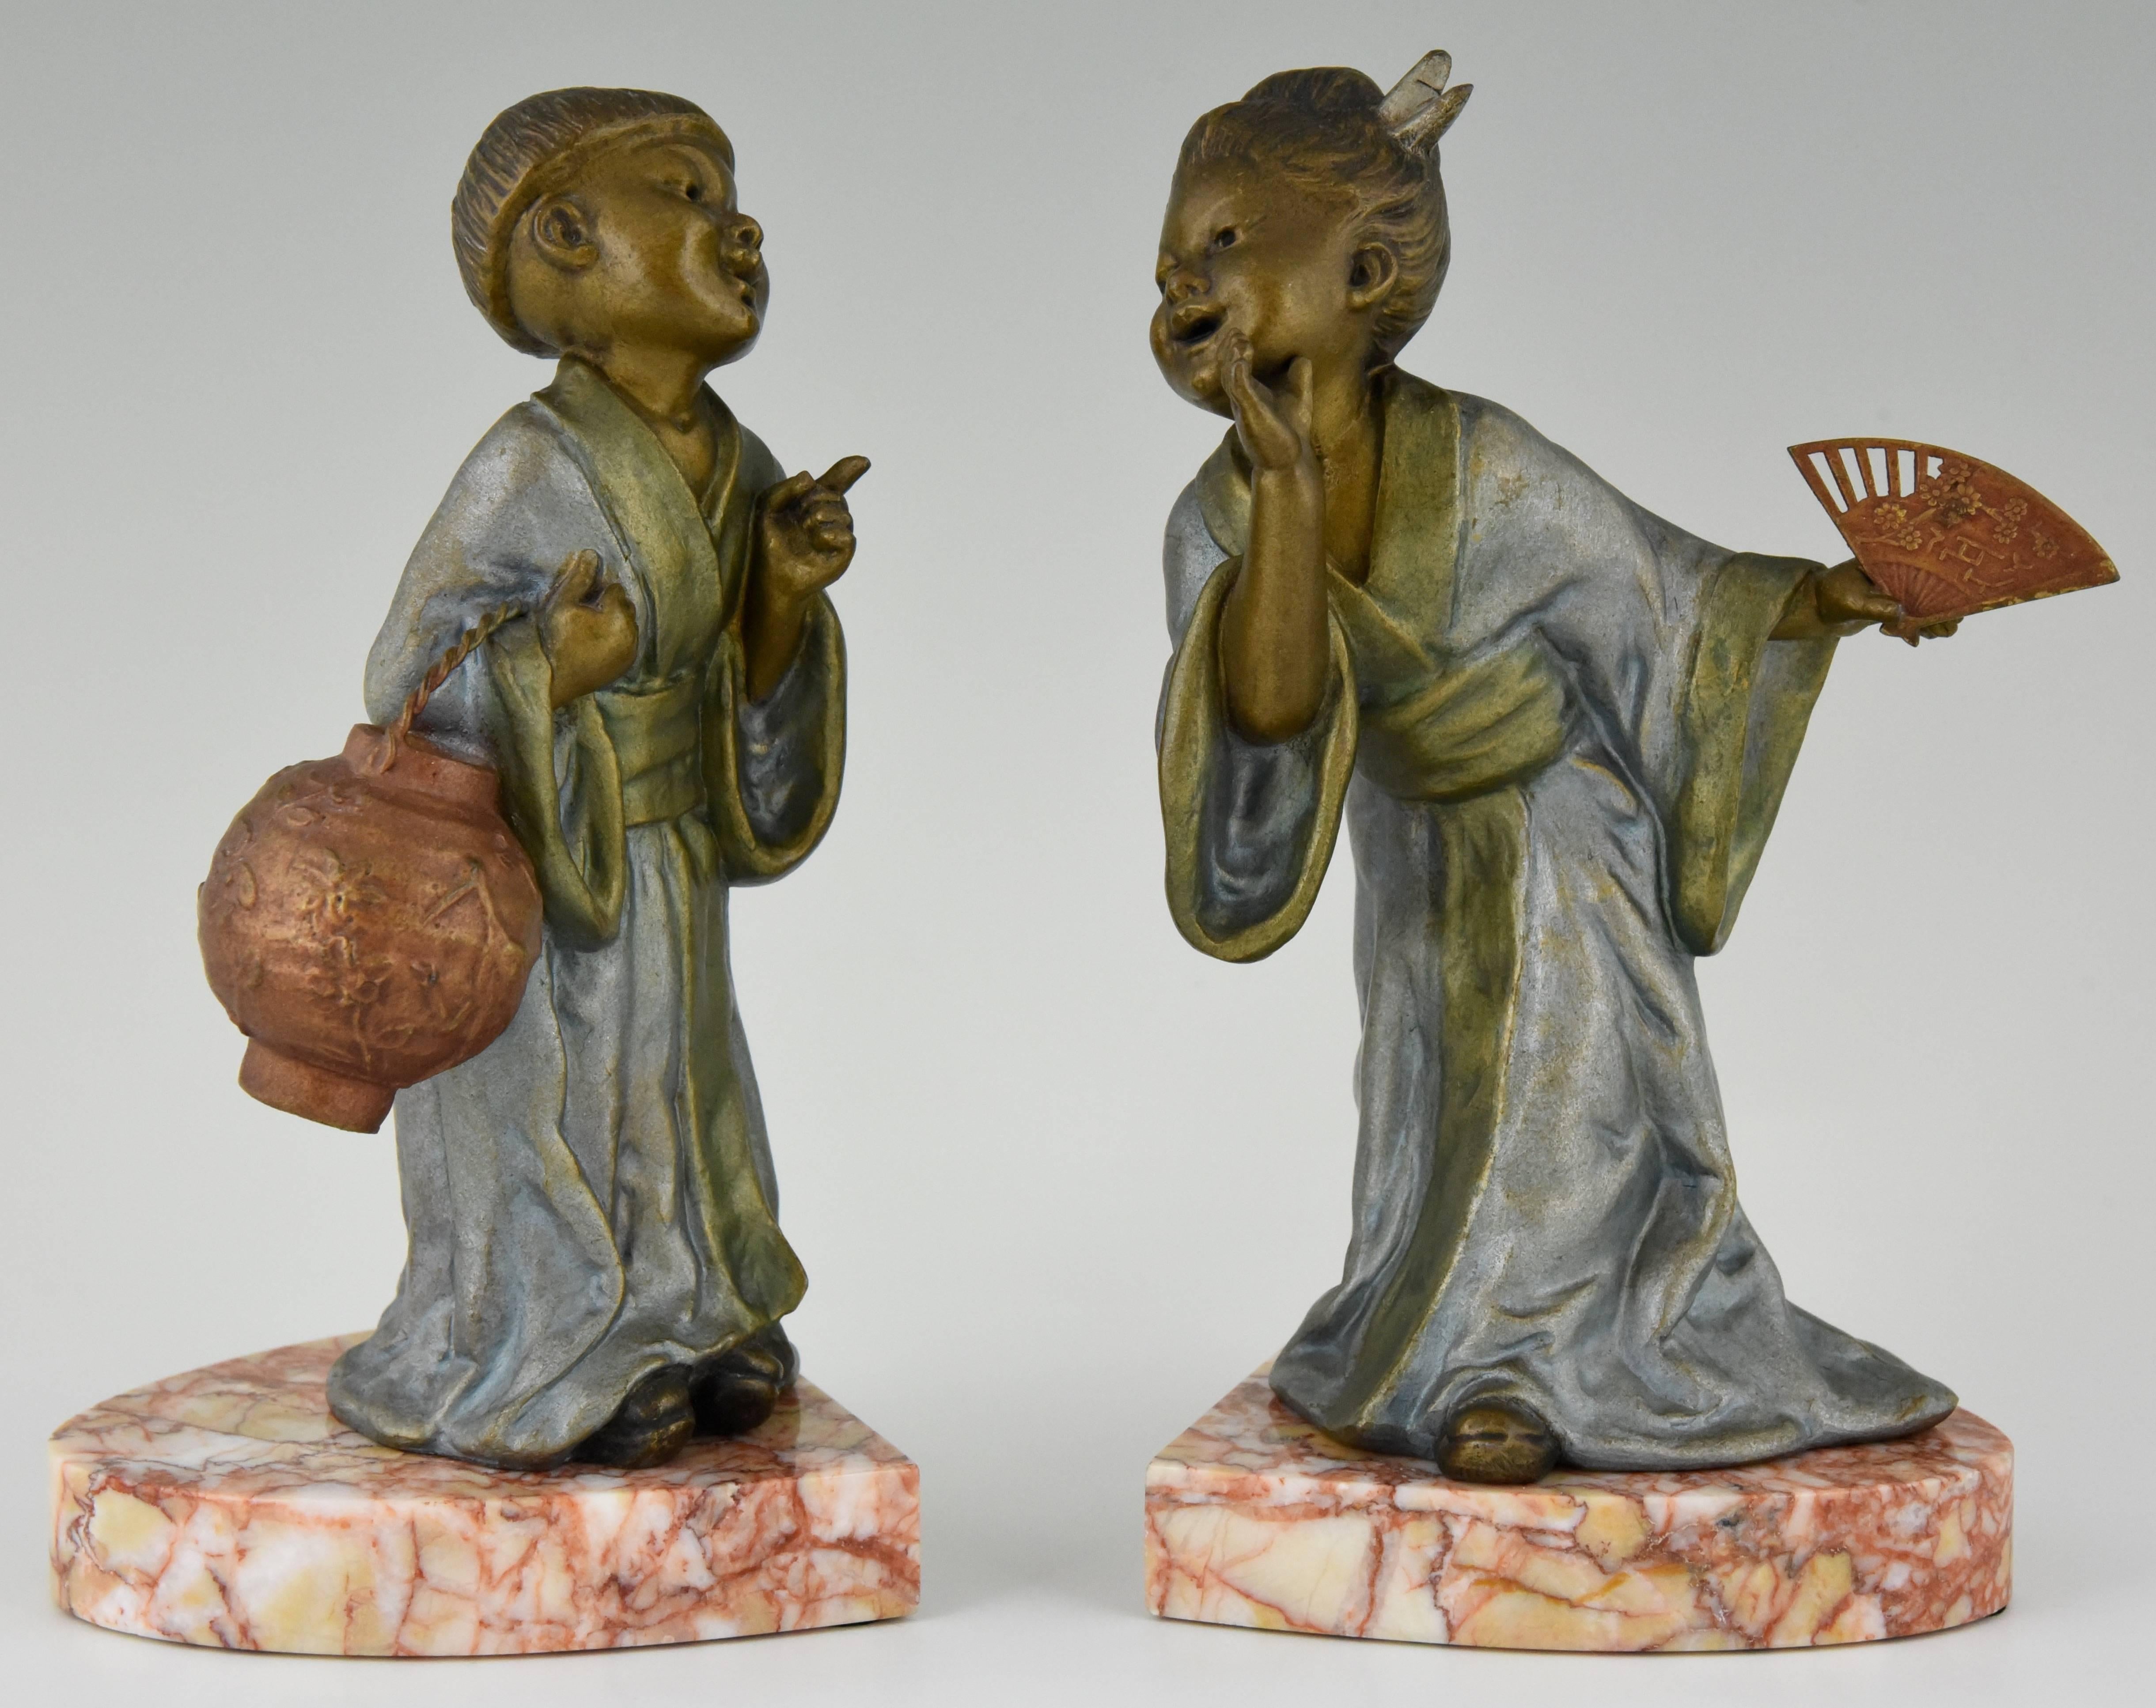 Lovely pair of bookends with a Chinese boy and girl.
Signature/ Marks: Geo Maxim
Style: Art Deco
Date: 1930
Material: Metal with multicolor patina on marble base.
Origin: France
Size: H 20 cm. x L 12 cm. x W 9.5 cm.? 
H 7.9 inch x L 4.7 inch